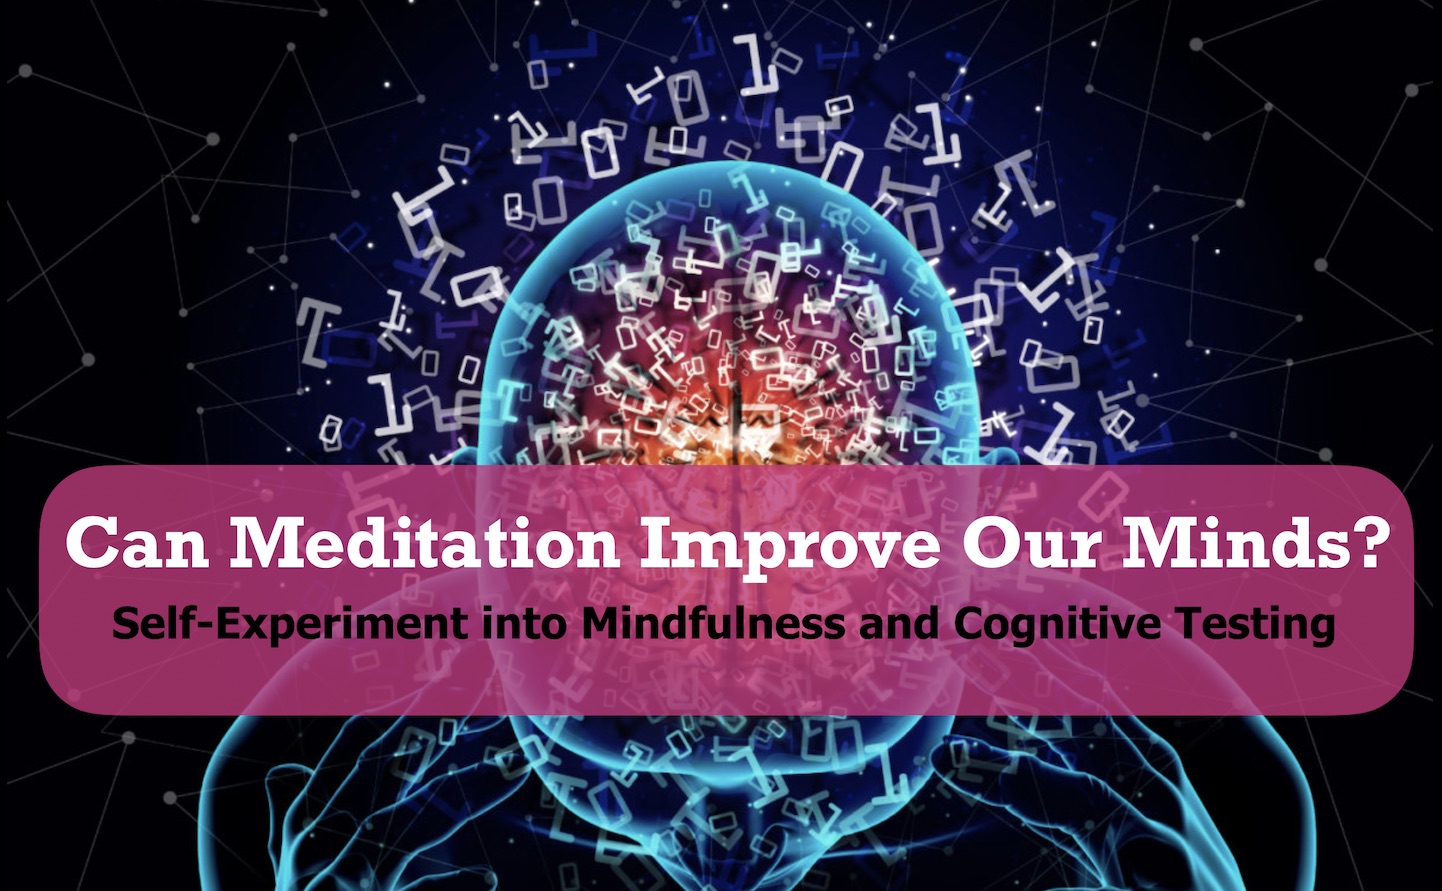 Can Meditation Improve Your Attention? Self-Experiment into Mindfulness and Cognitive Testing